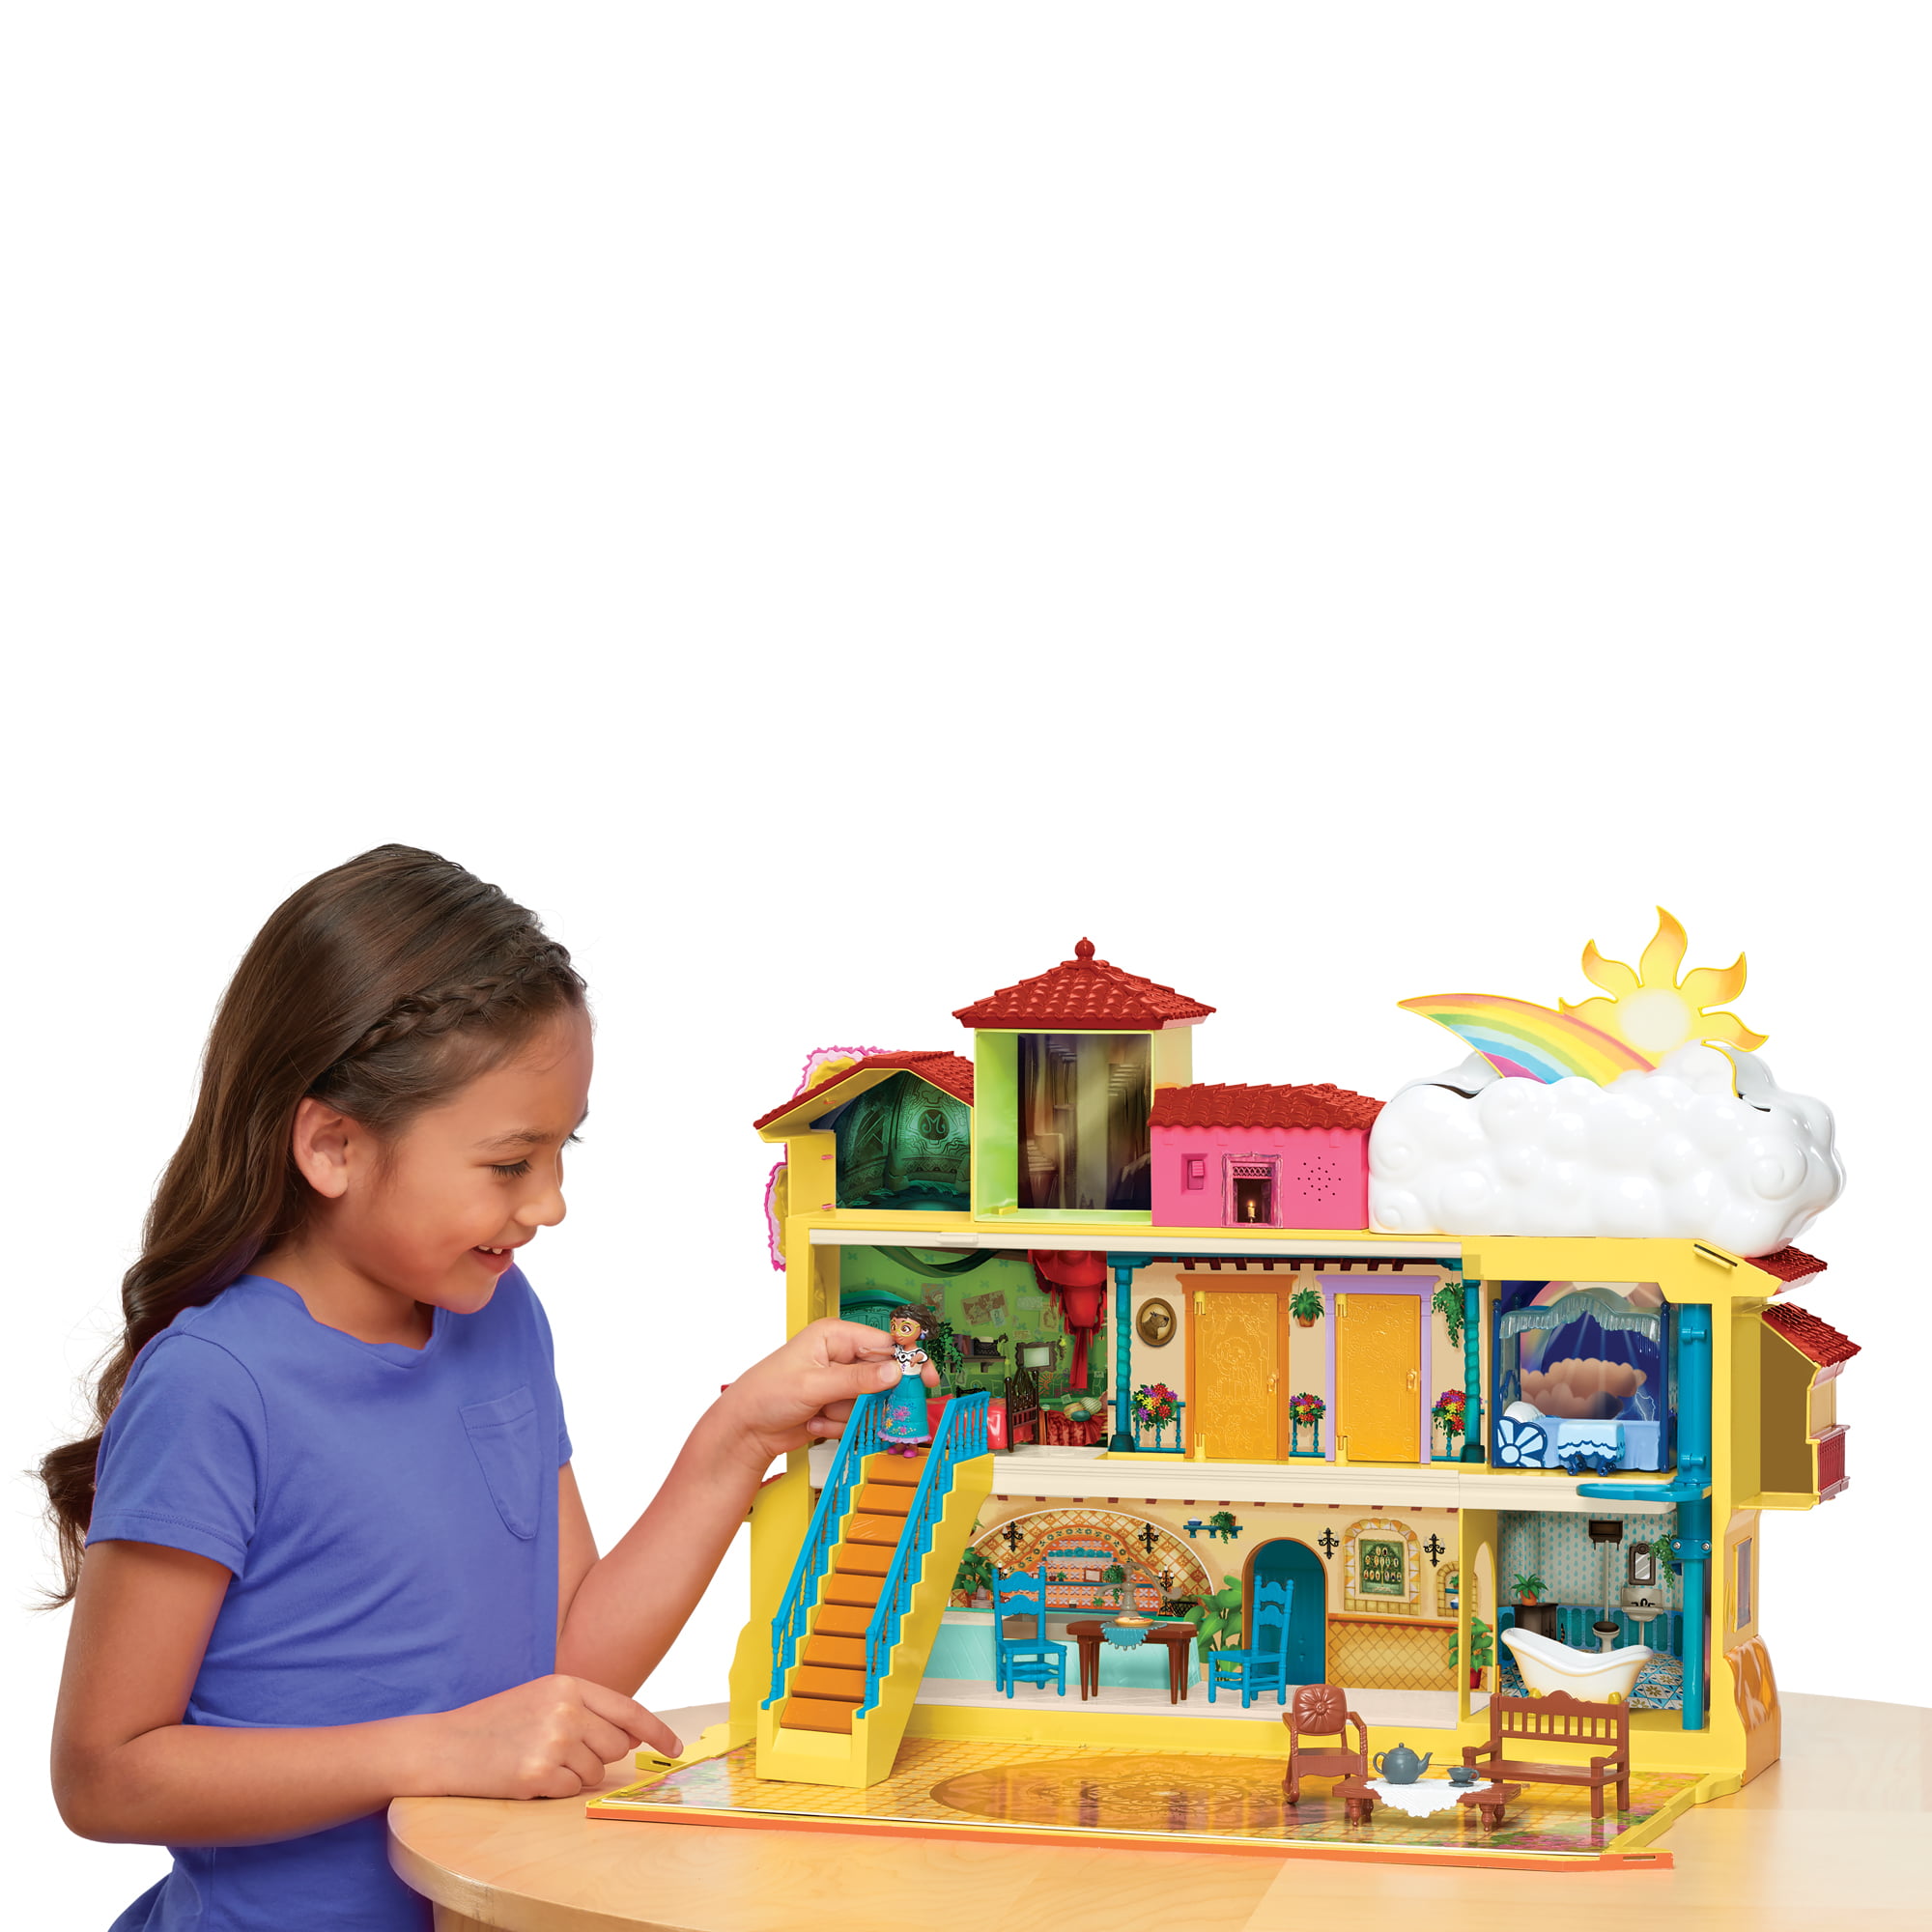 Disney Encanto Magical Casa Madrigal Interactive Dollhouse Playset w/ Lights & Sounds  $35.88 + Free Shipping